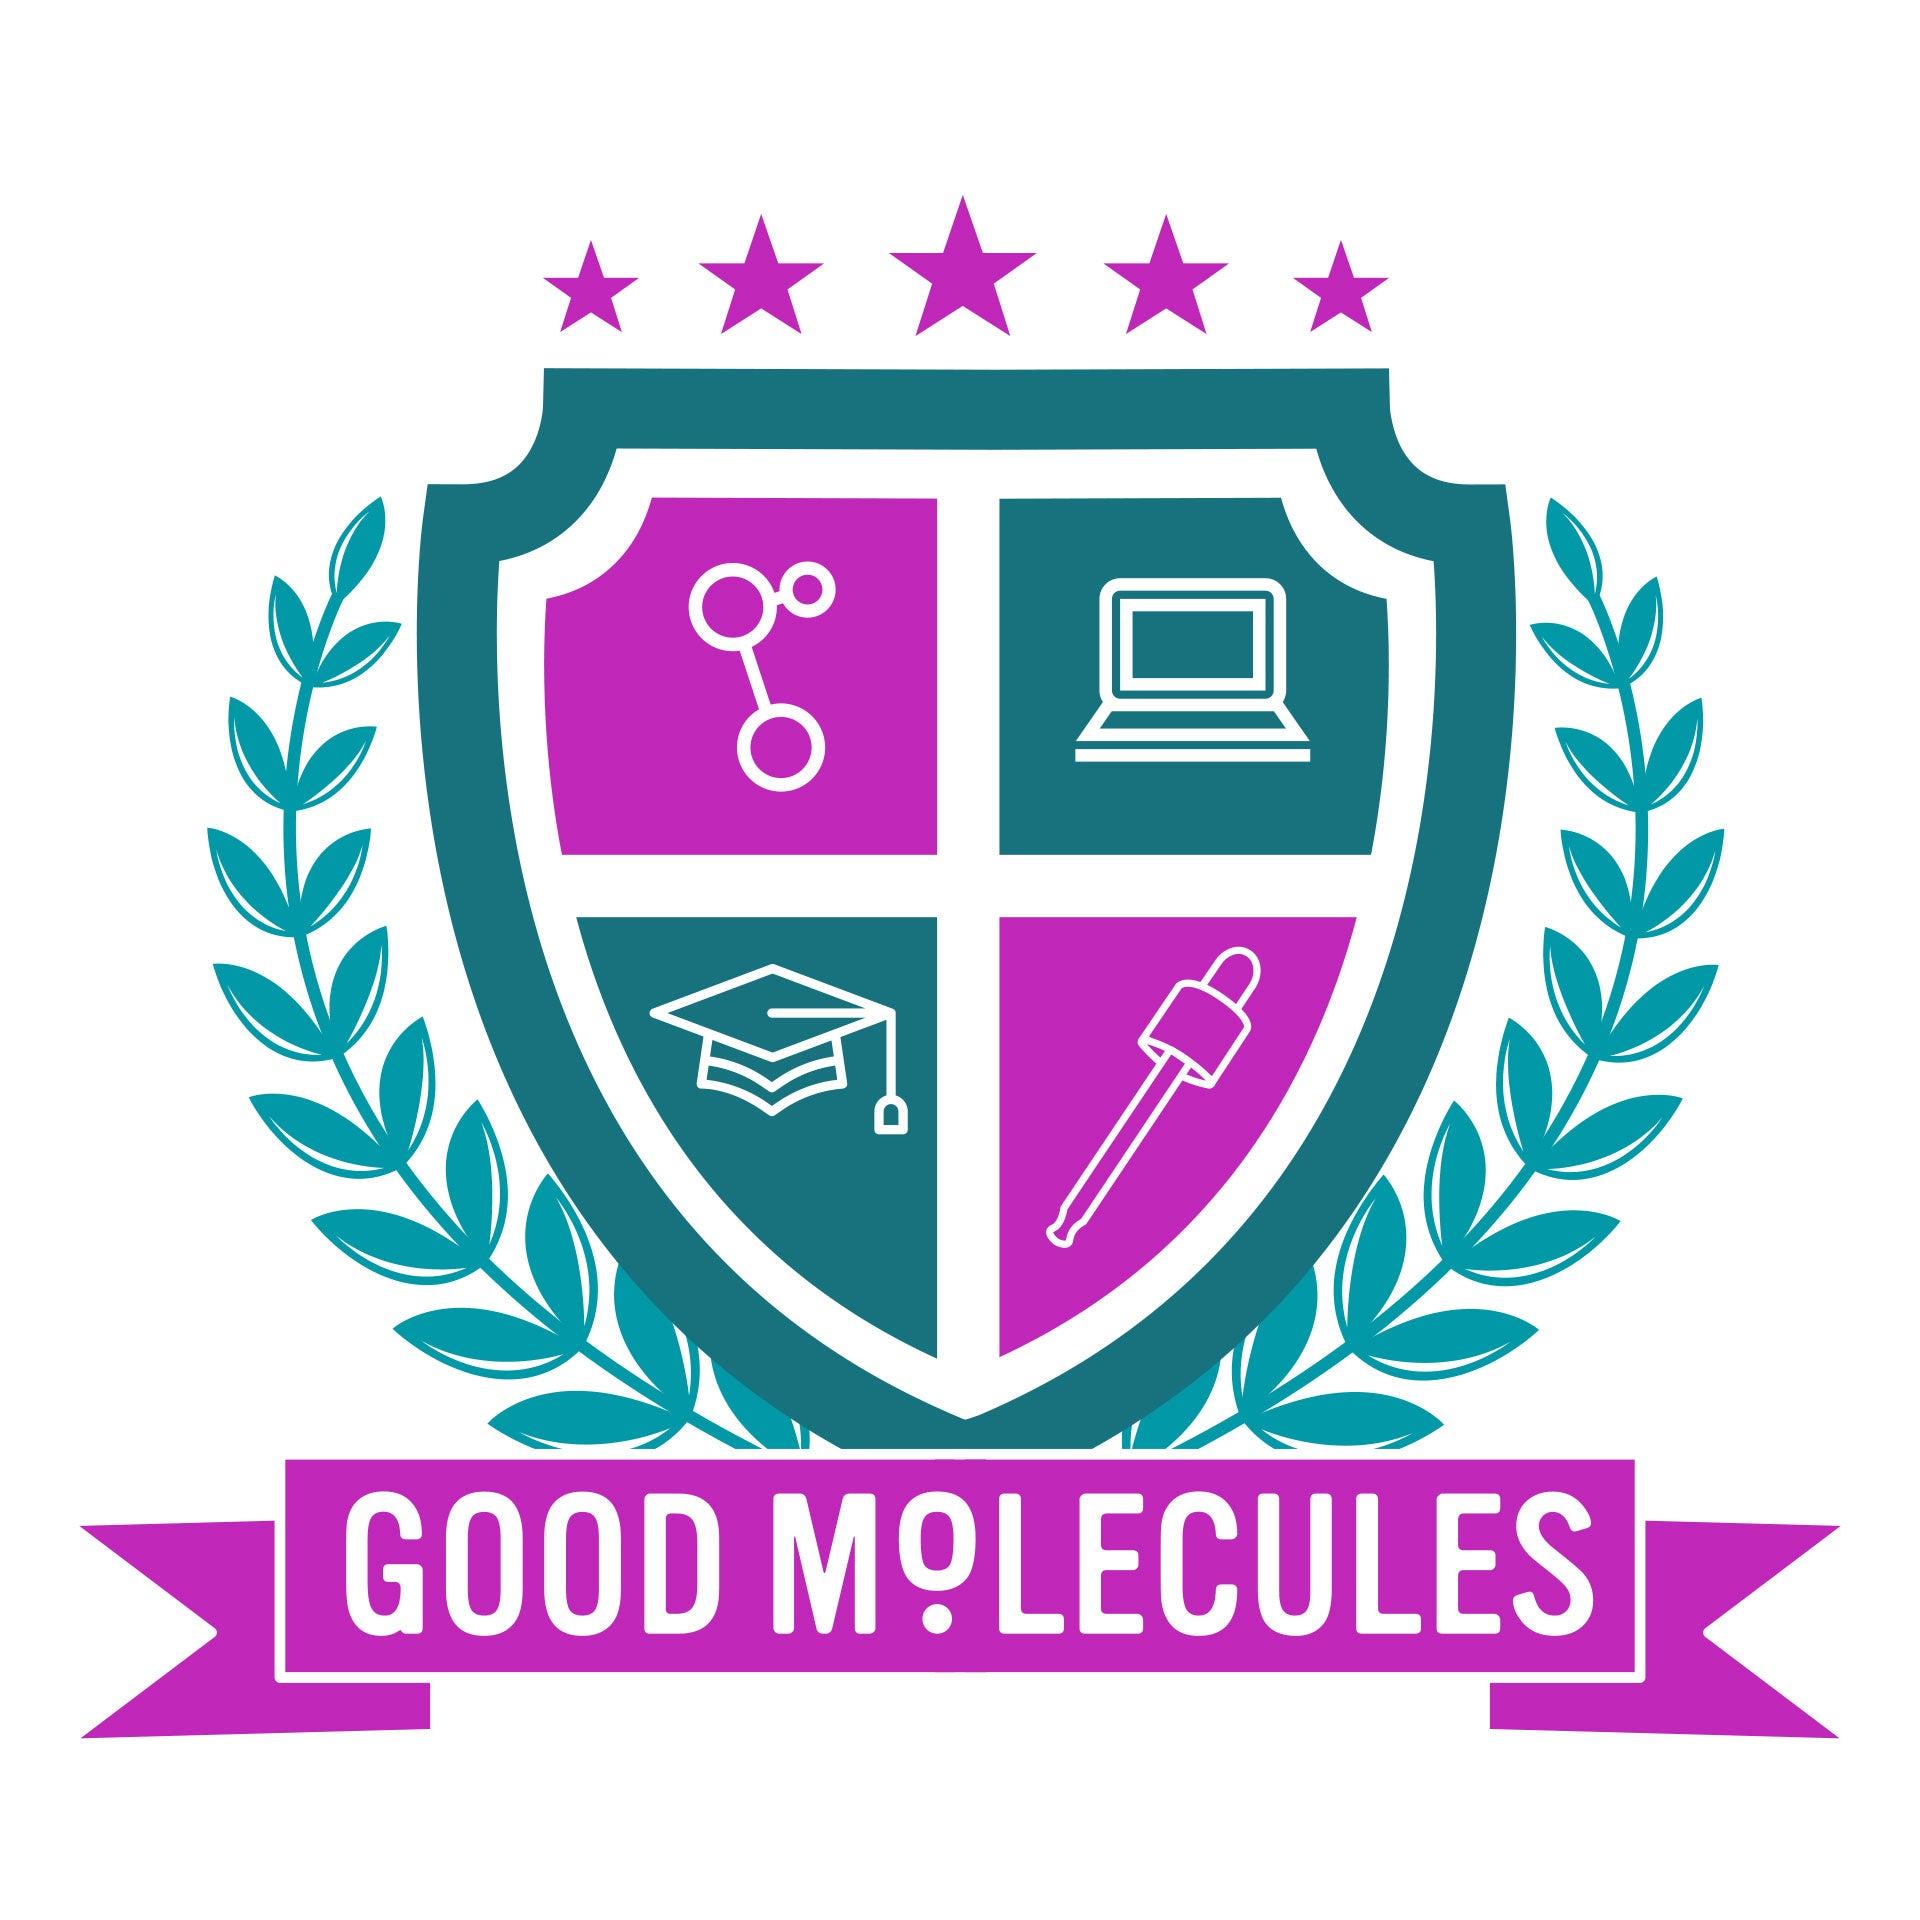 Good Molecules is coming to the University of Louisville!